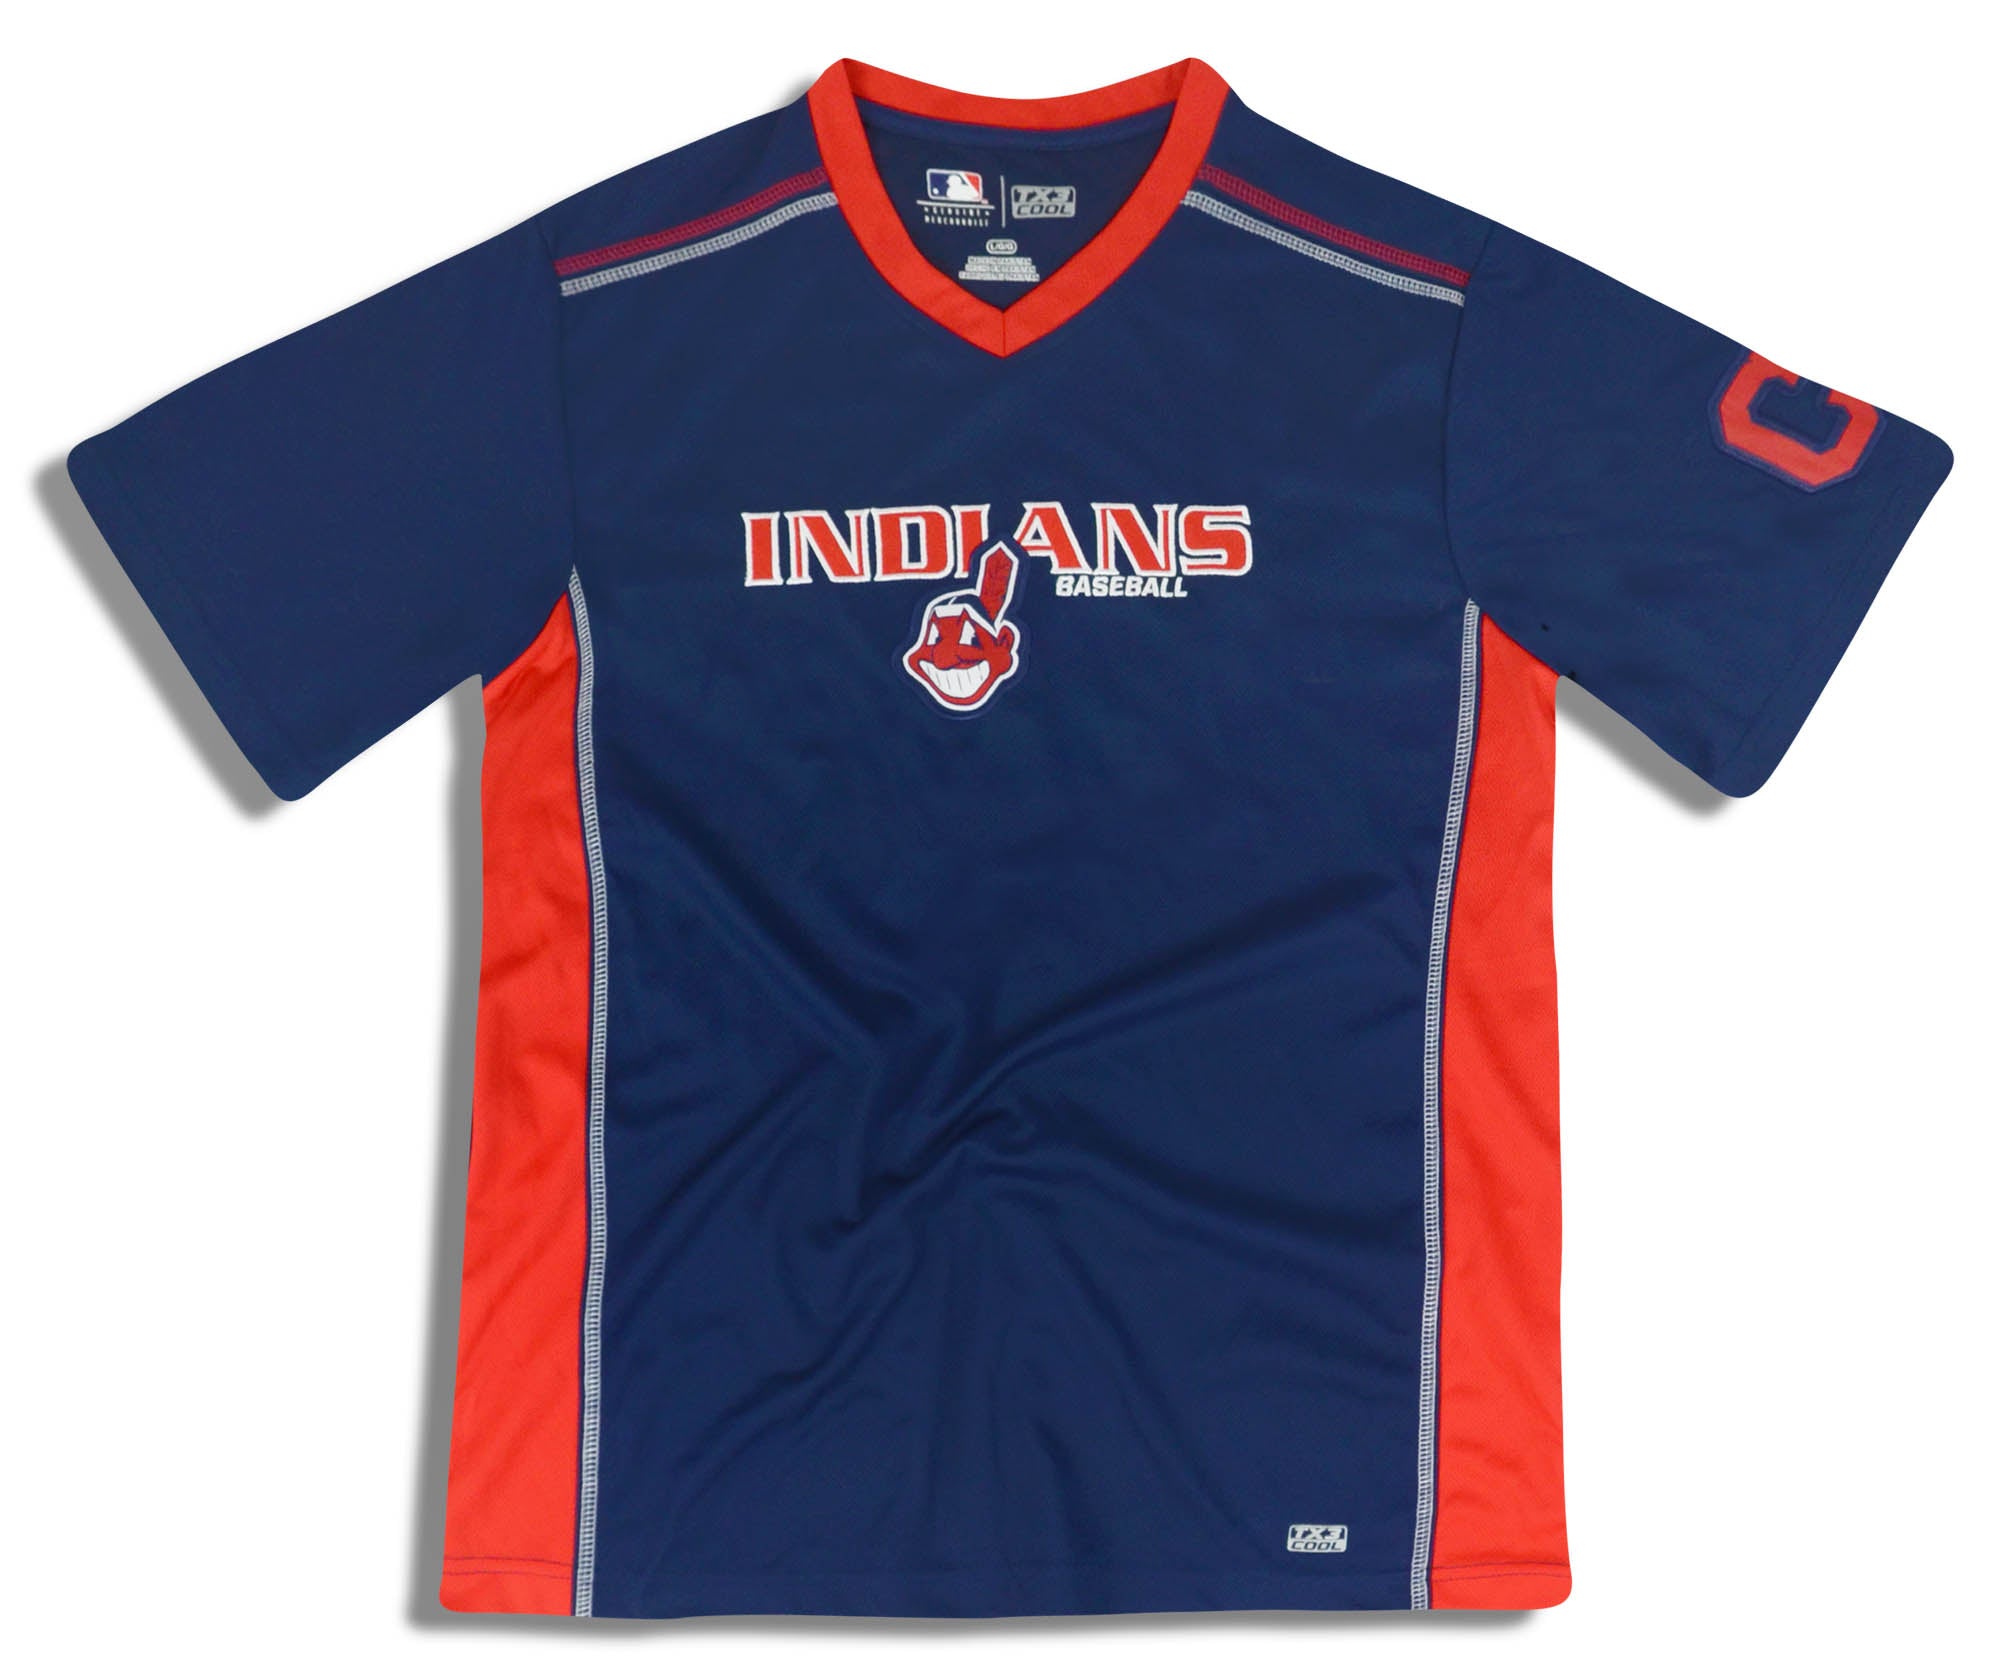 2015 CLEVELAND INDIANS TX3 COOL TRAINING TEE L